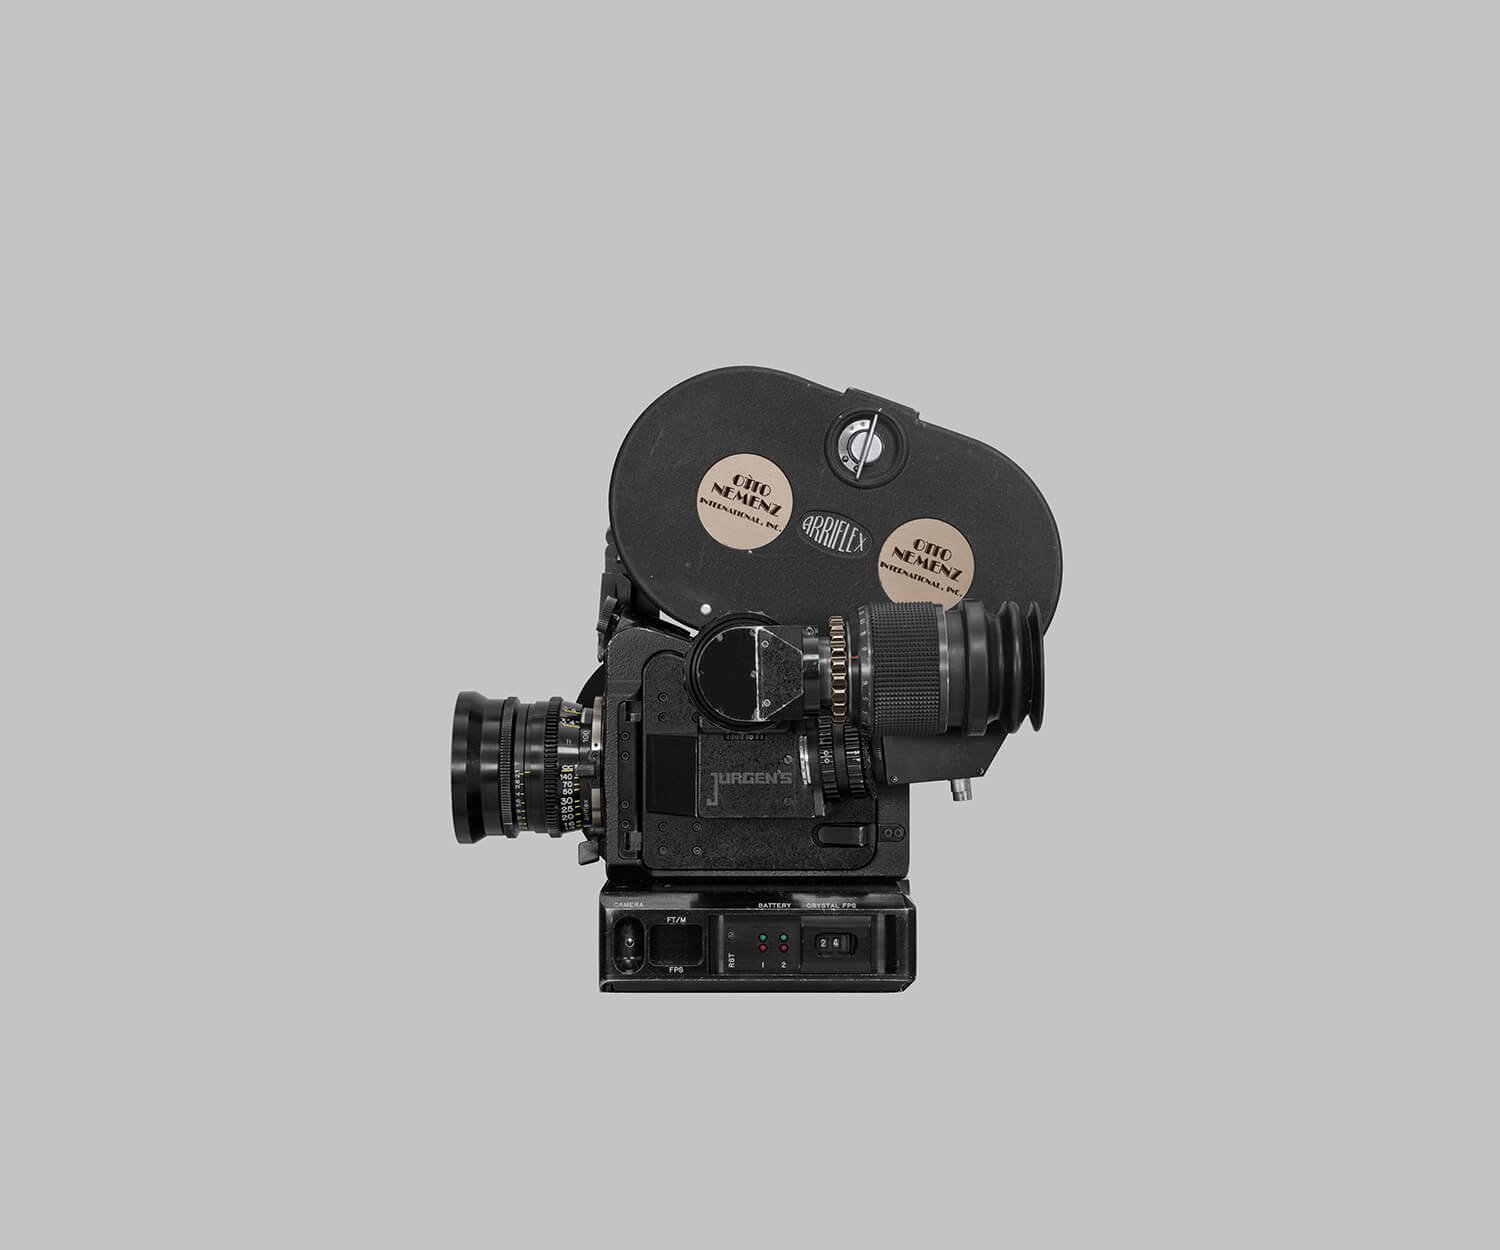 rogers arriflex 35mm motion picture camera by James Georgopoulos